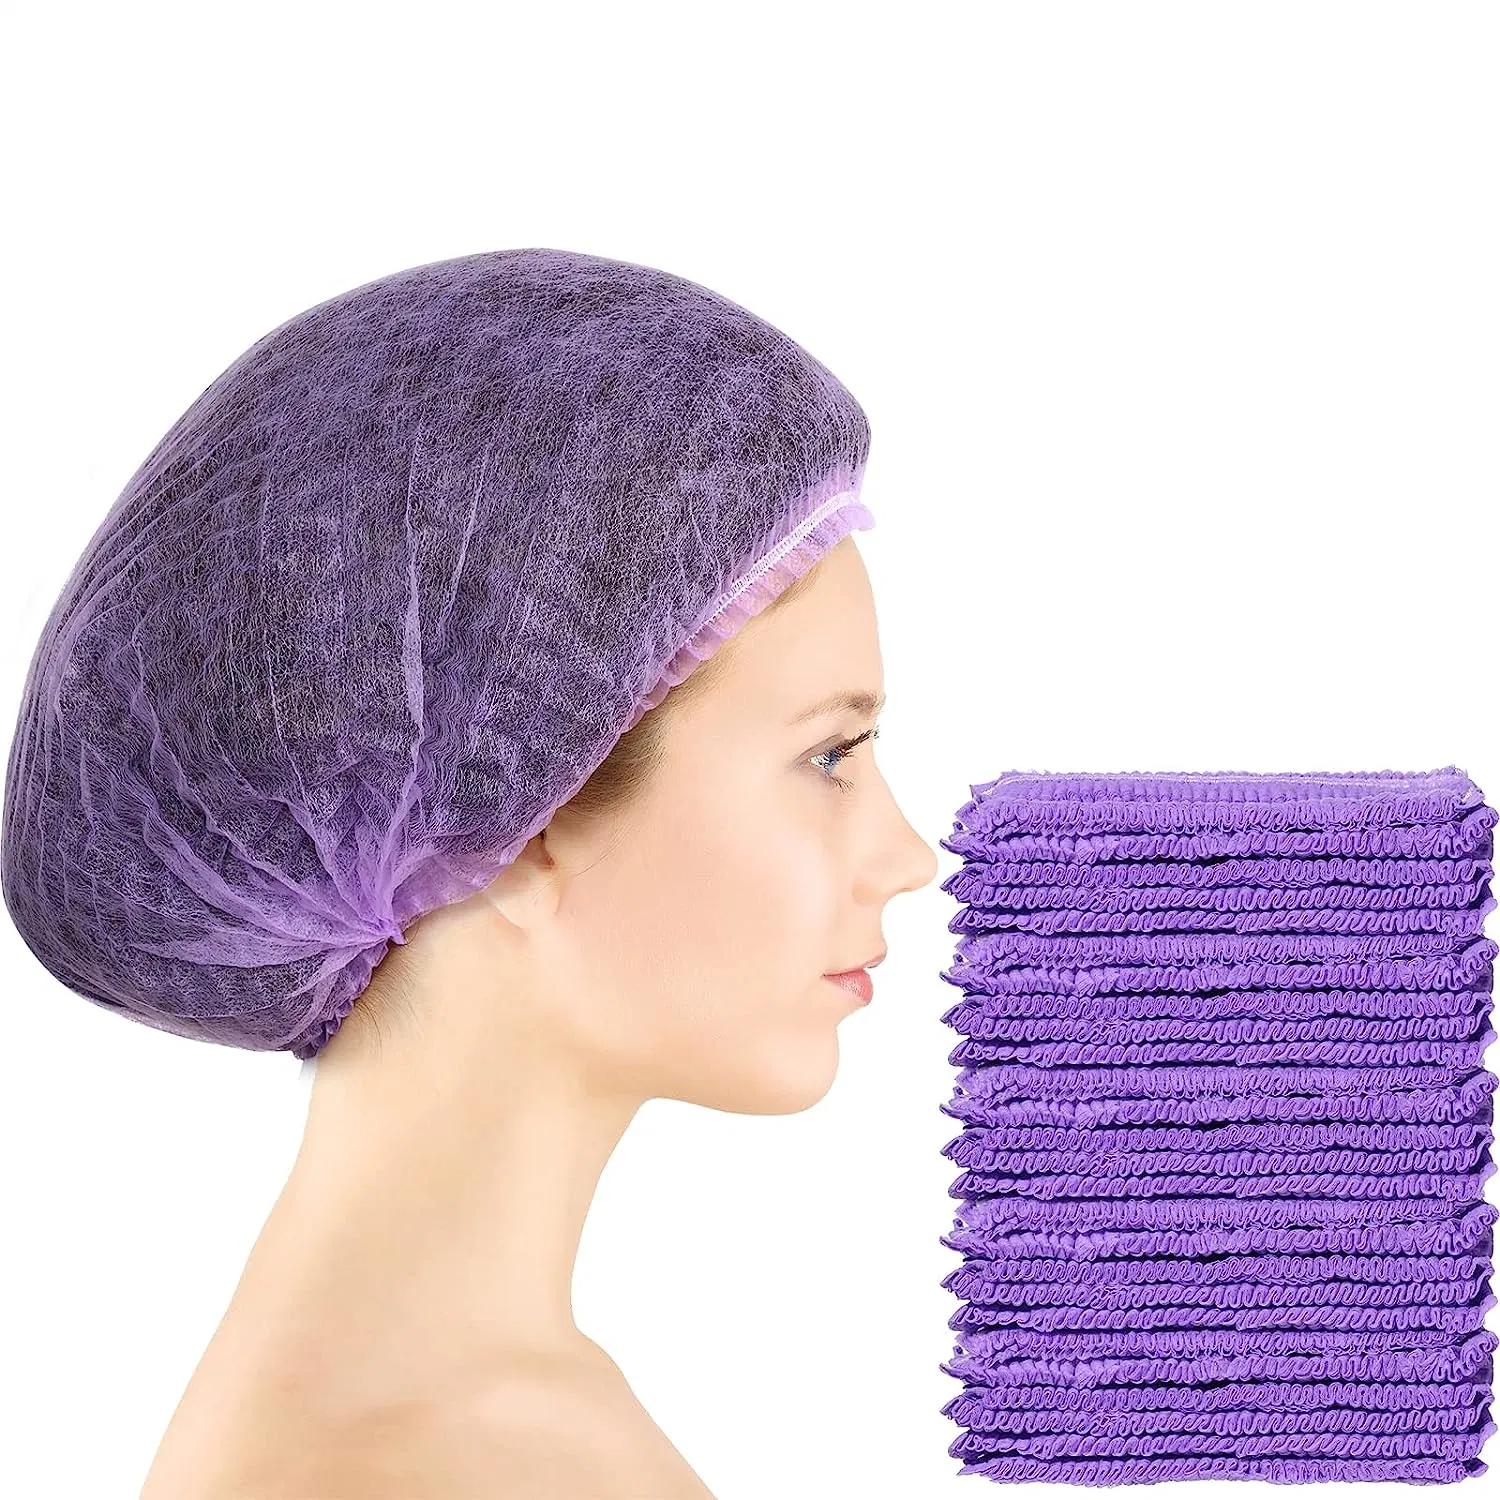 Disposable Bouffant Caps Hair Net, Non-Woven, Non-Pleated Hairnets, Perfect for Medical, Labs, Nurse, Tattoo, Food Service, Hospital